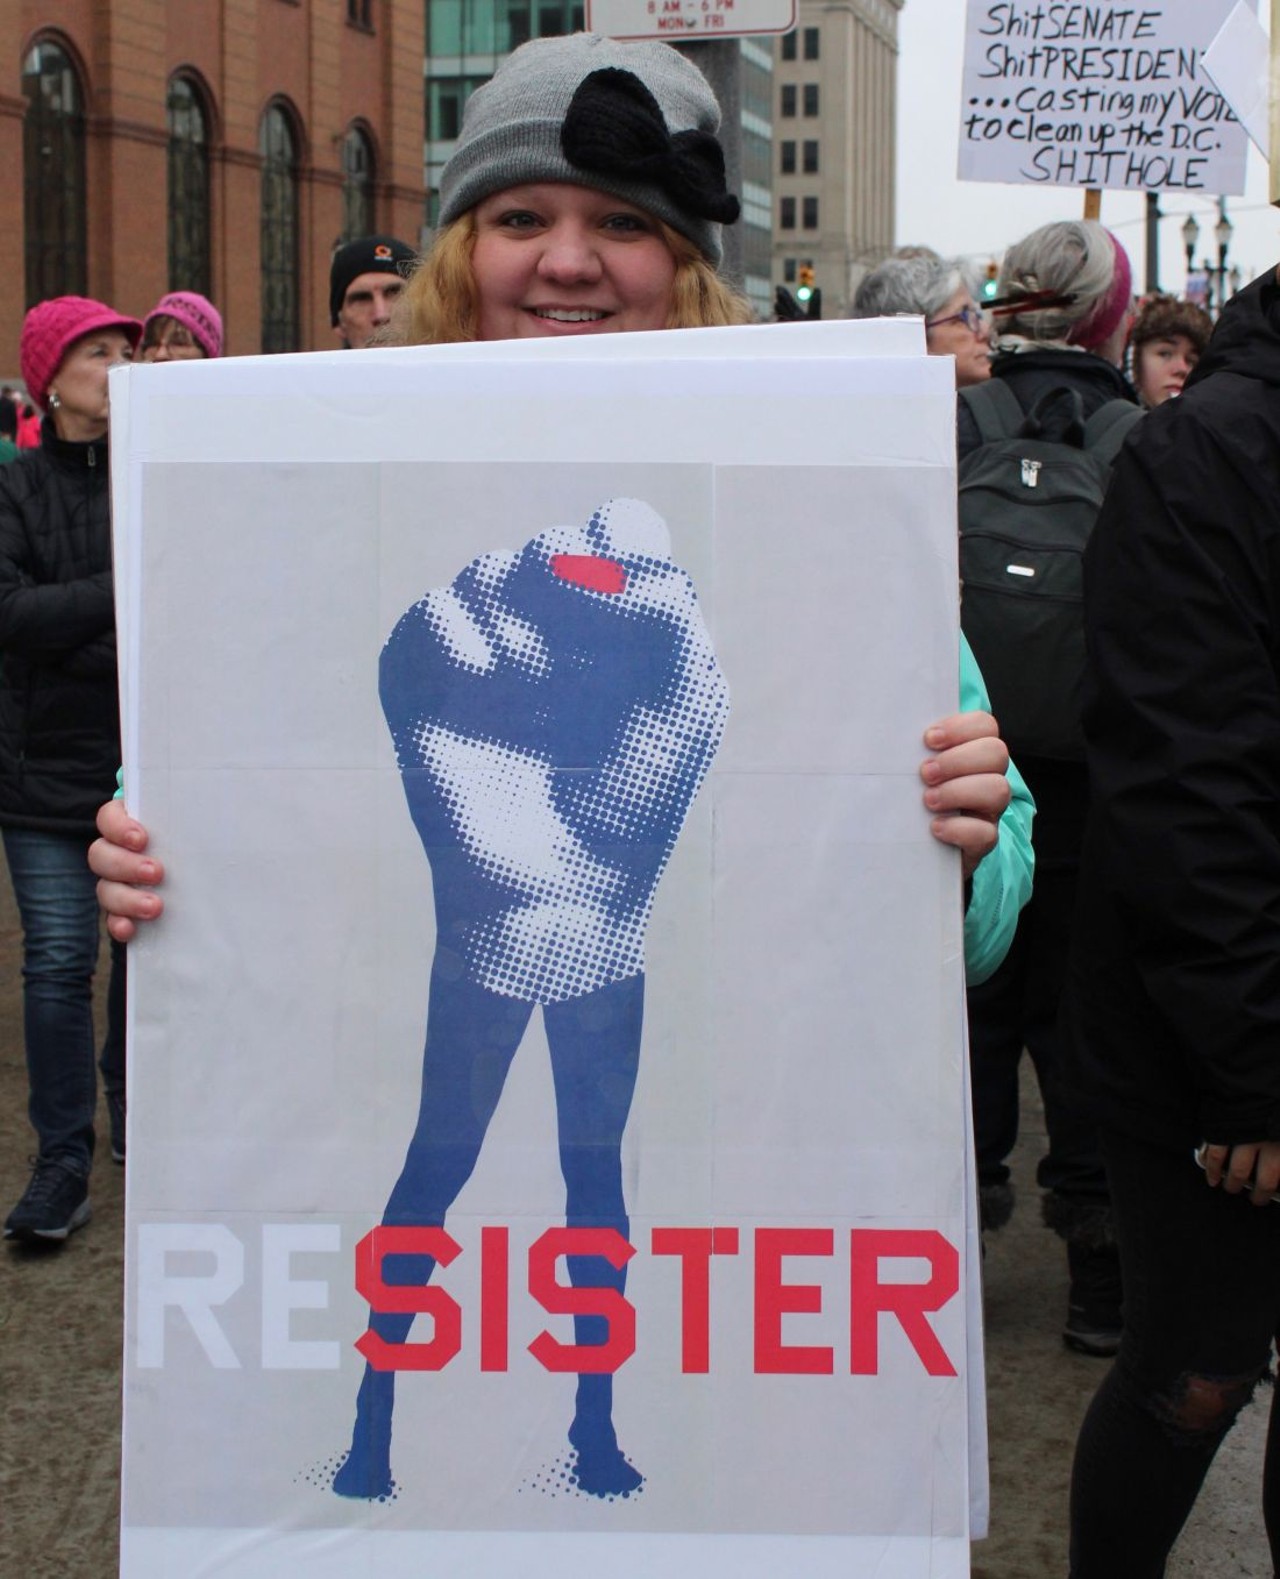 &#147;Obviously for women&#146;s rights. I think that&#146;s important to have support for women everyday.&#148;
&#151; Allison Marek